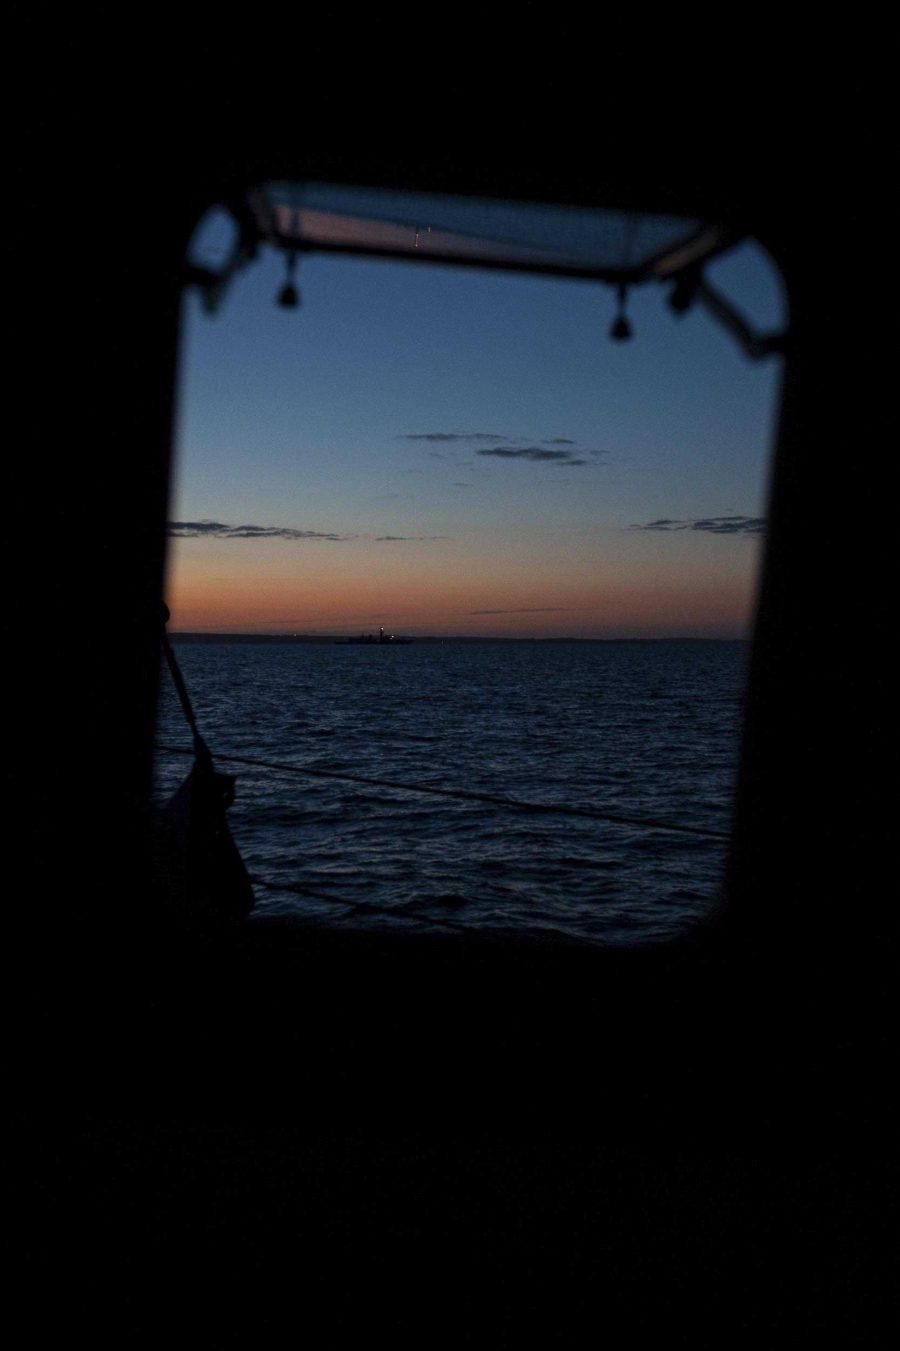 Looking out of a window on a fishing boat as the sun is setting.